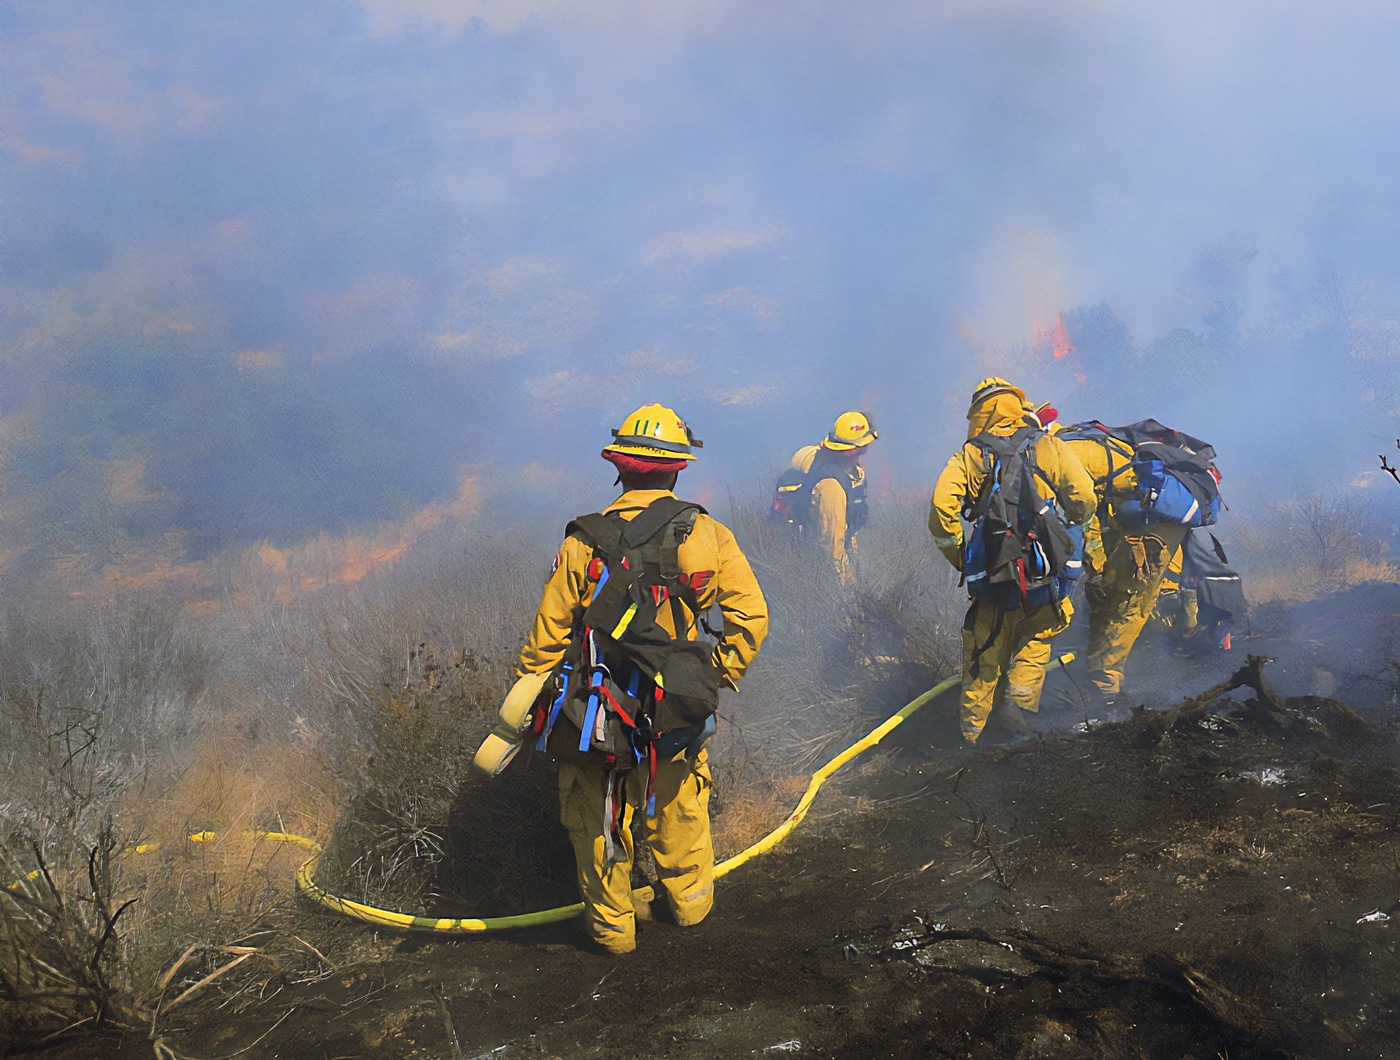 In this photograph, firefighters work to protect a California community from a wildfire. The brush fire is seen with flames licking up into the air from plants.